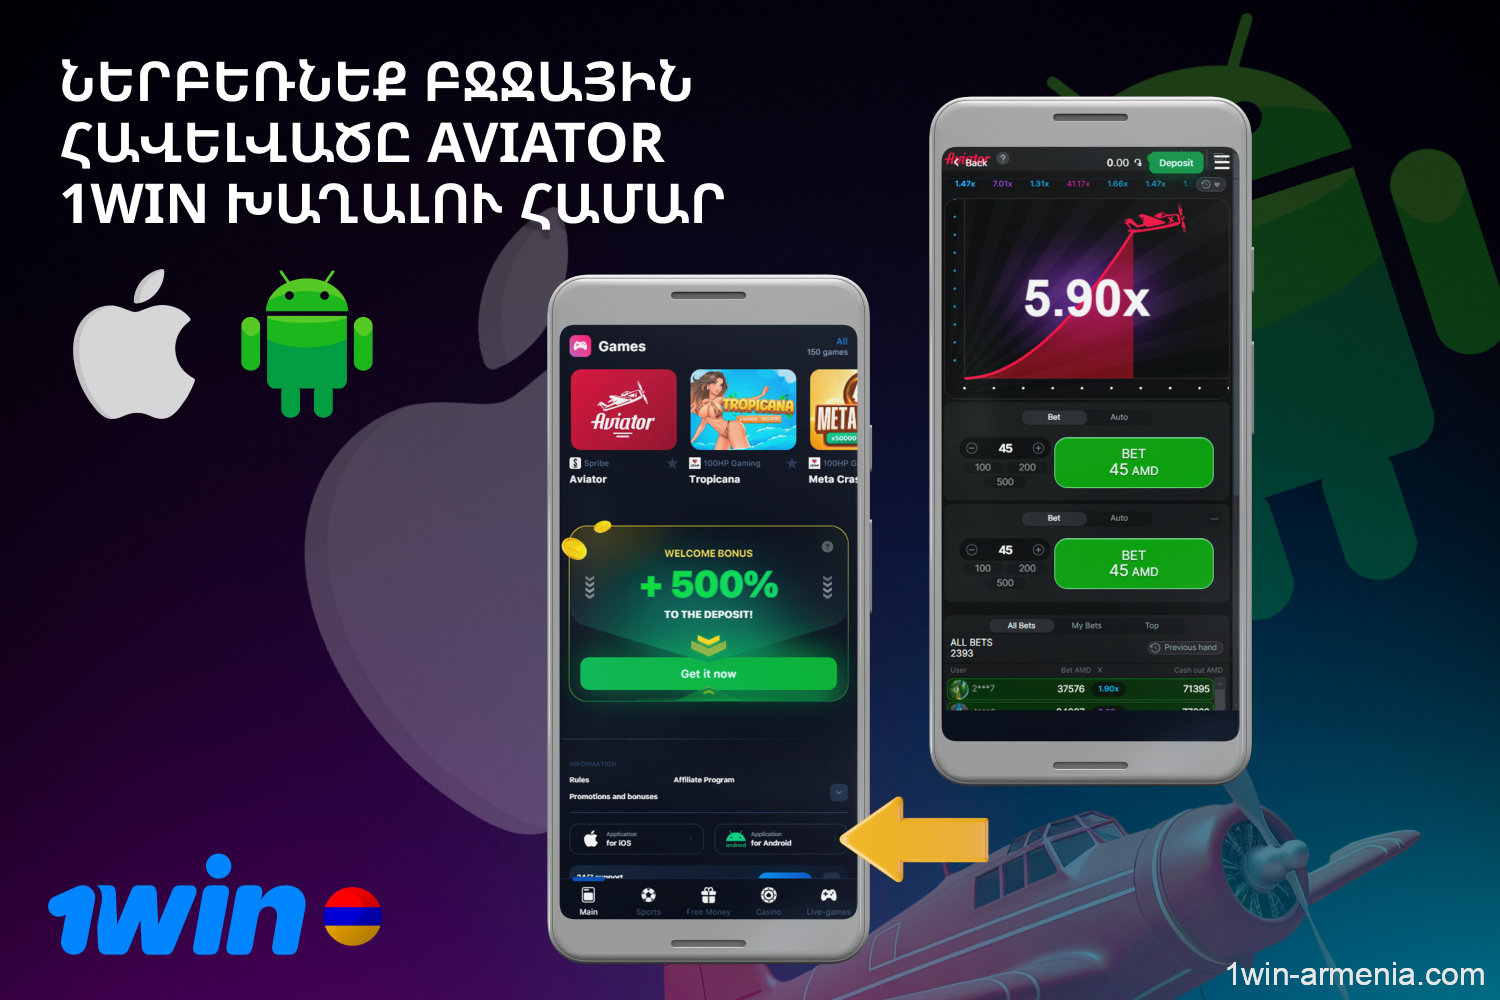 To play Aviator comfortably, users from Armenia can quickly and free download the mobile application for Android and iOS from the 1win website